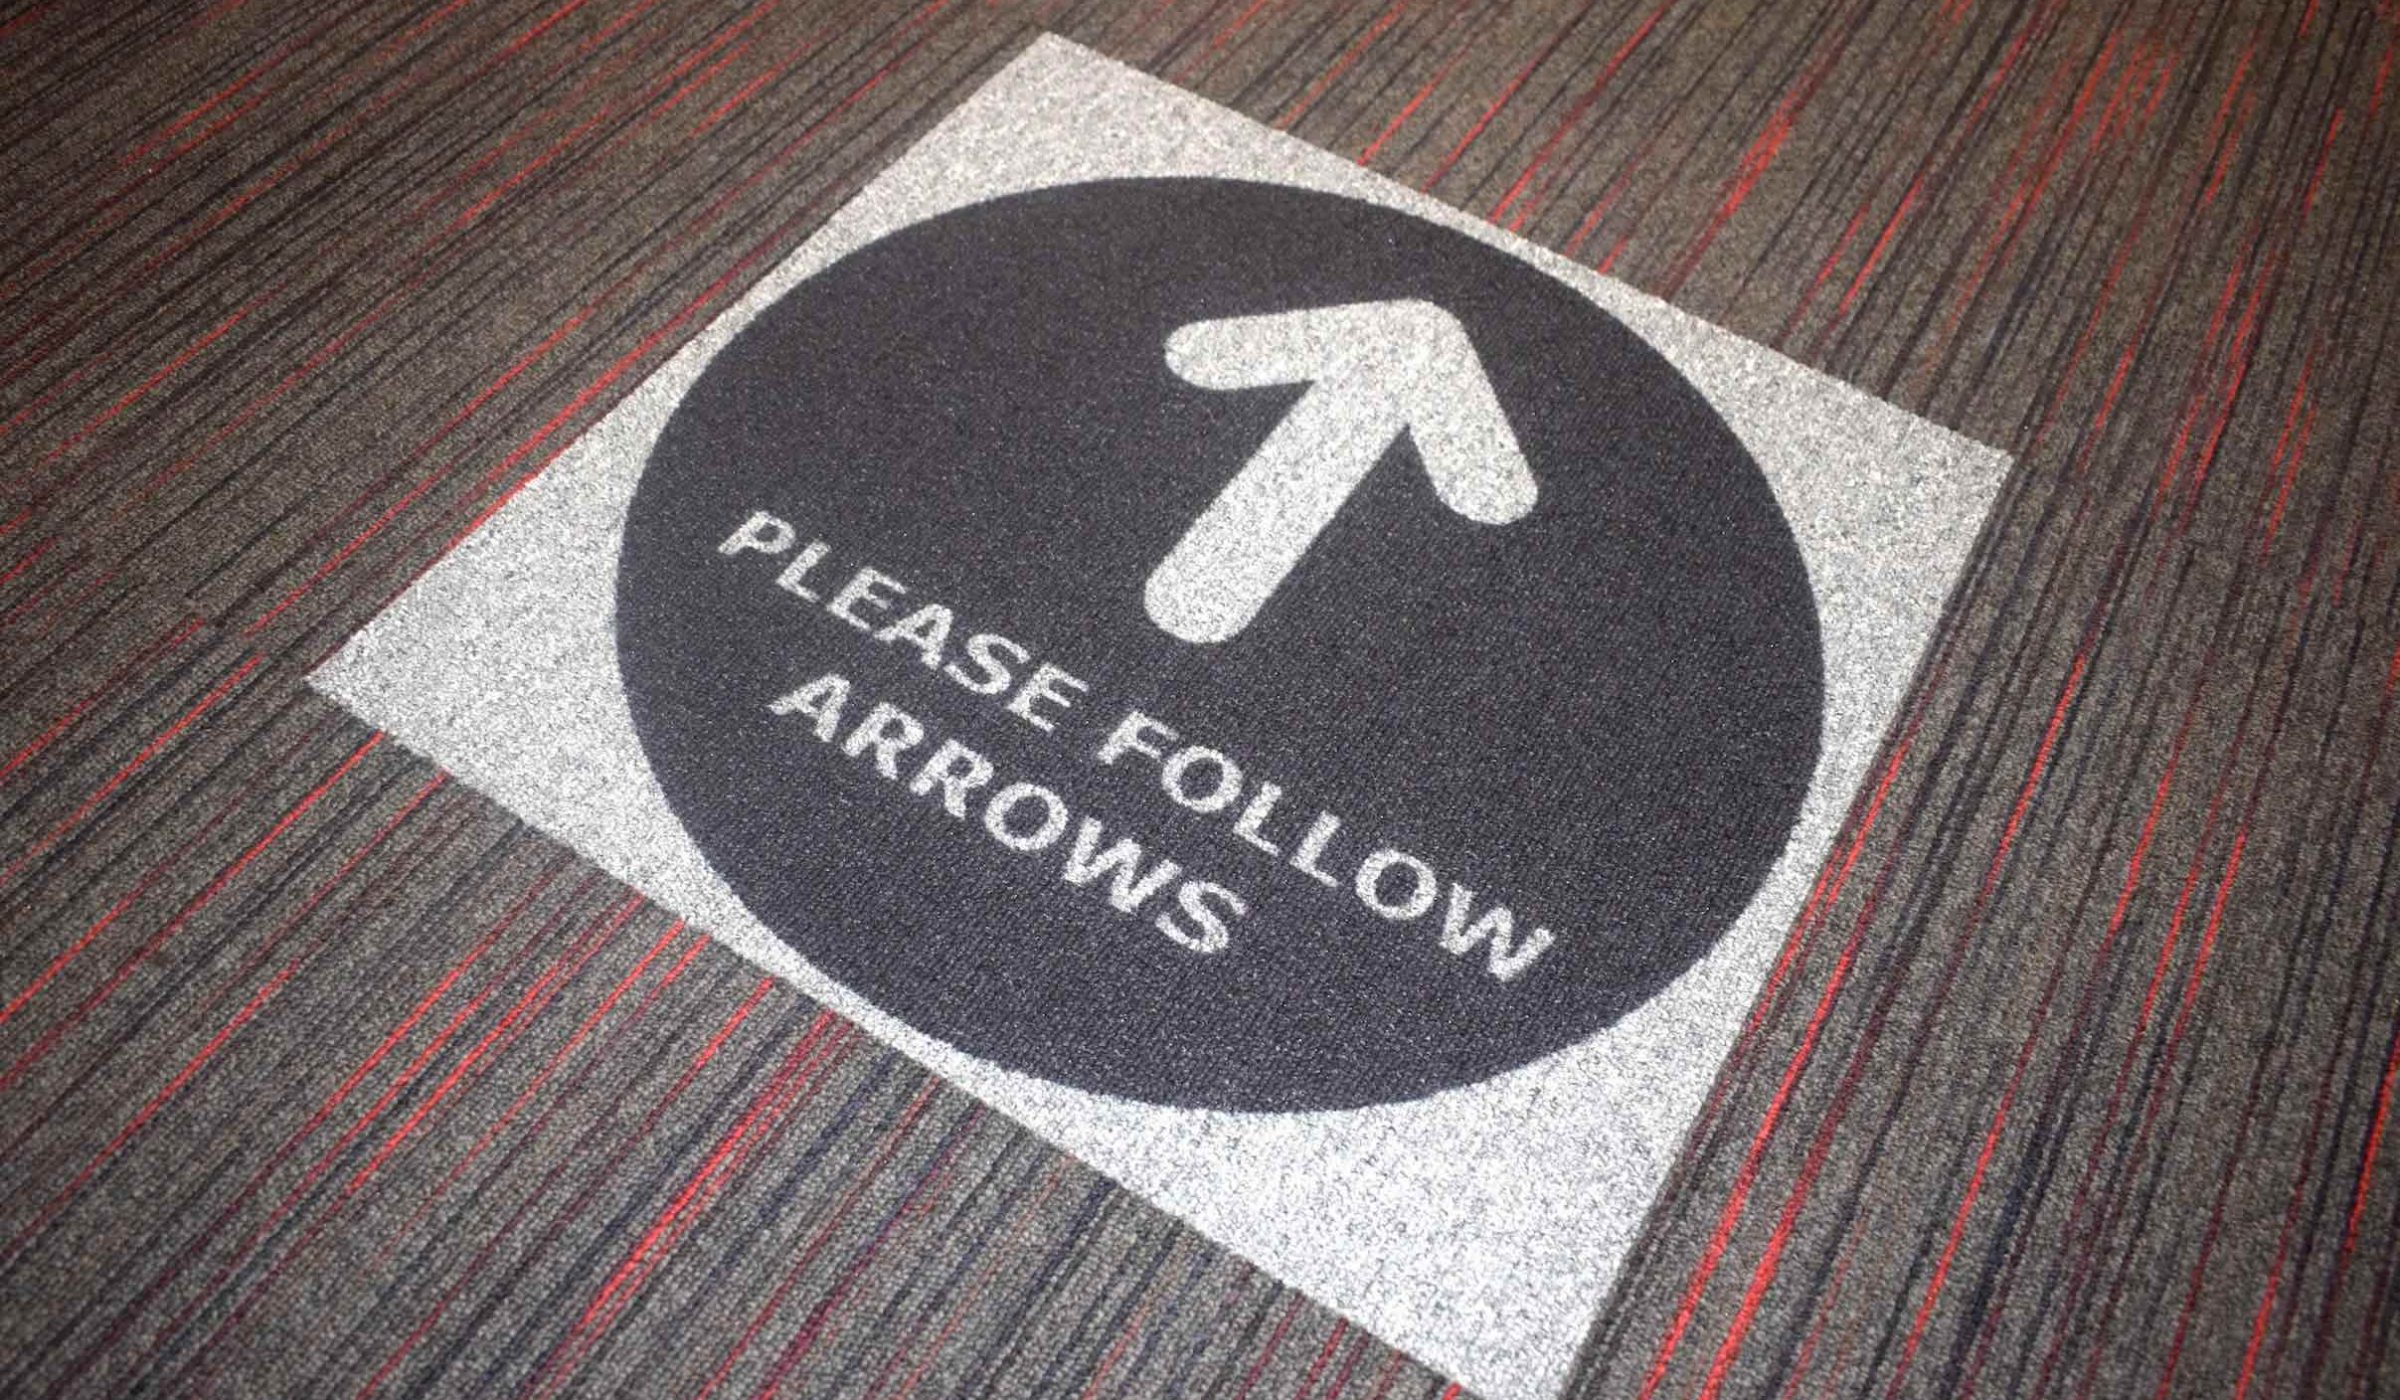 Hard Wearing Commercial Carpet Tiles With 1 Way System Arrow Social Distancing 